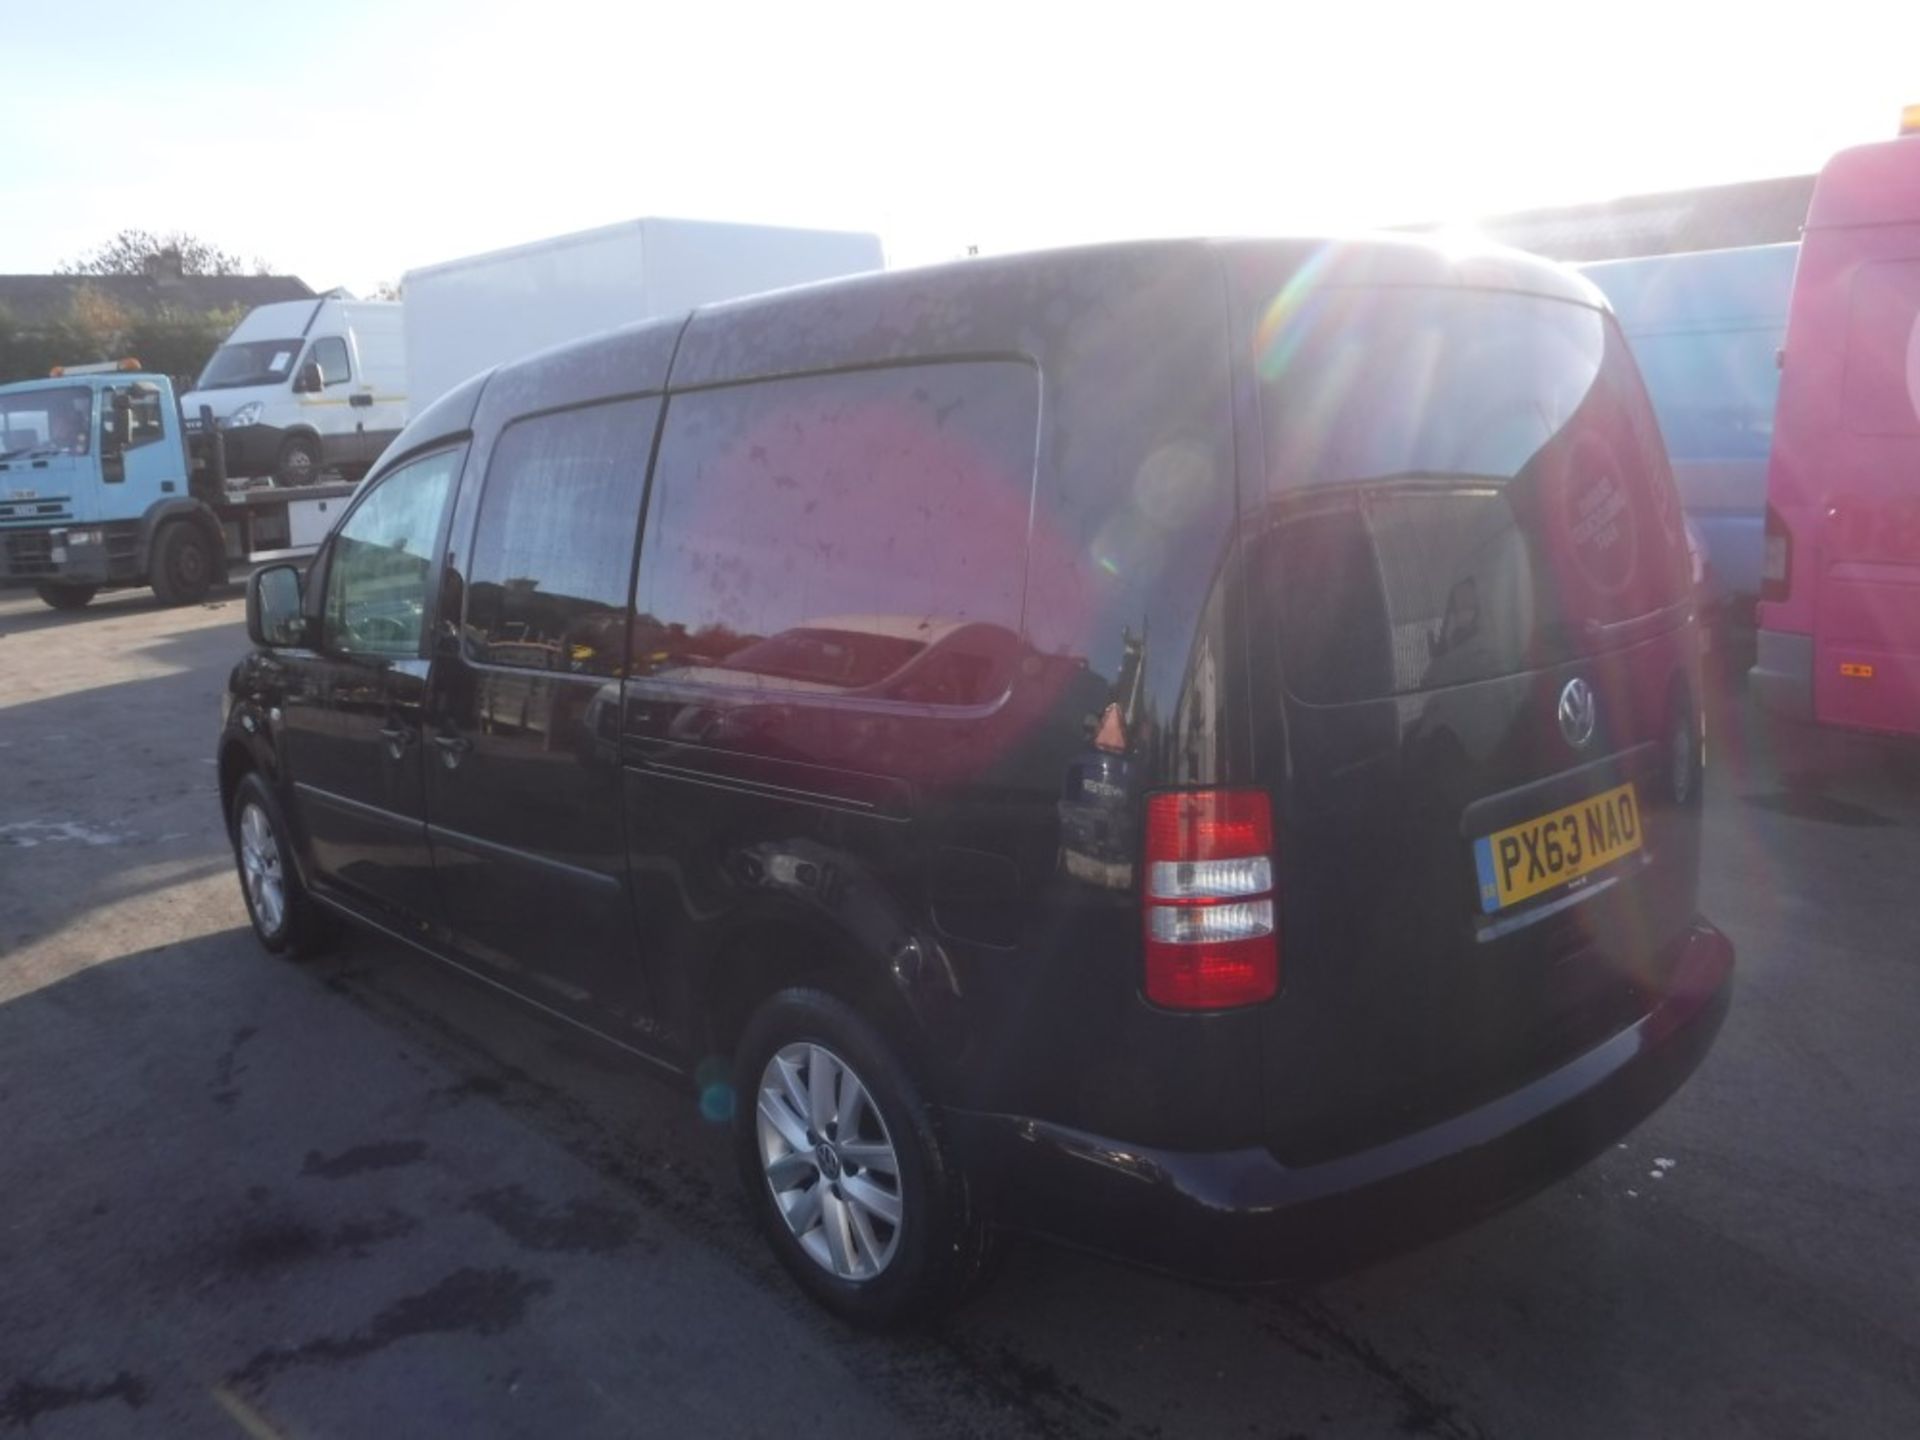 63 reg VW CADDY MAXI C20 TDI, 1ST REG 10/13, 118238M WARRANTED, V5 HERE, 1 OWNER FROM NEW [+ VAT] - Image 3 of 6